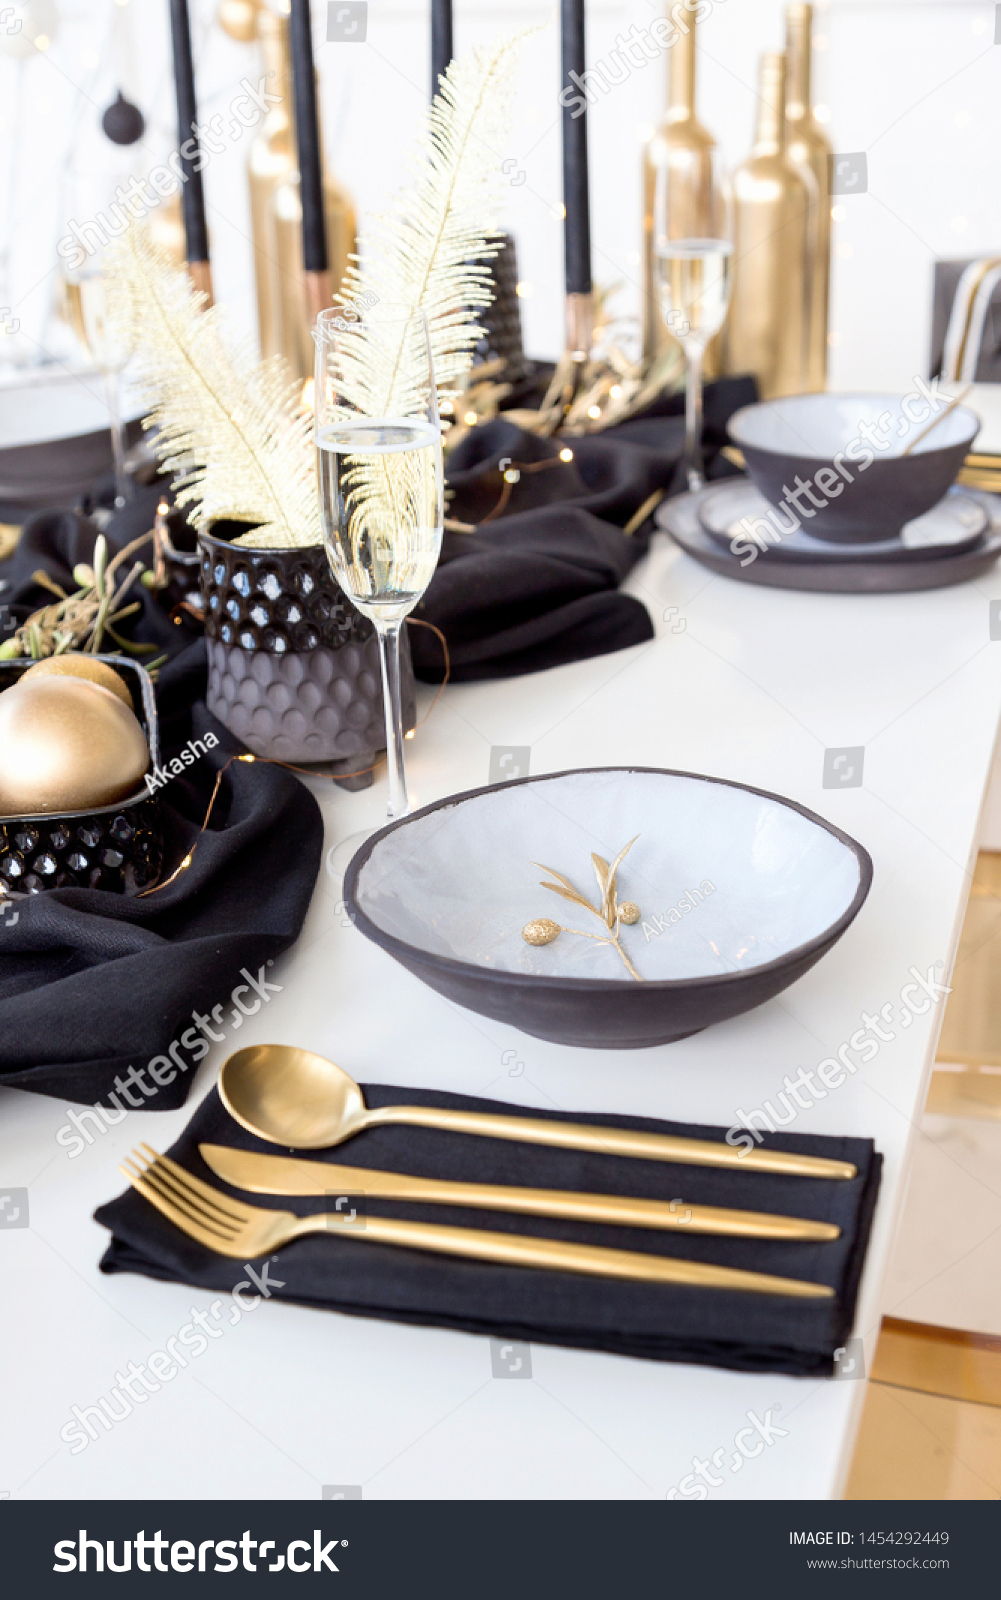 Classical Luxury Festive Table Setting Winter Stock Photo Edit Now 1454292449